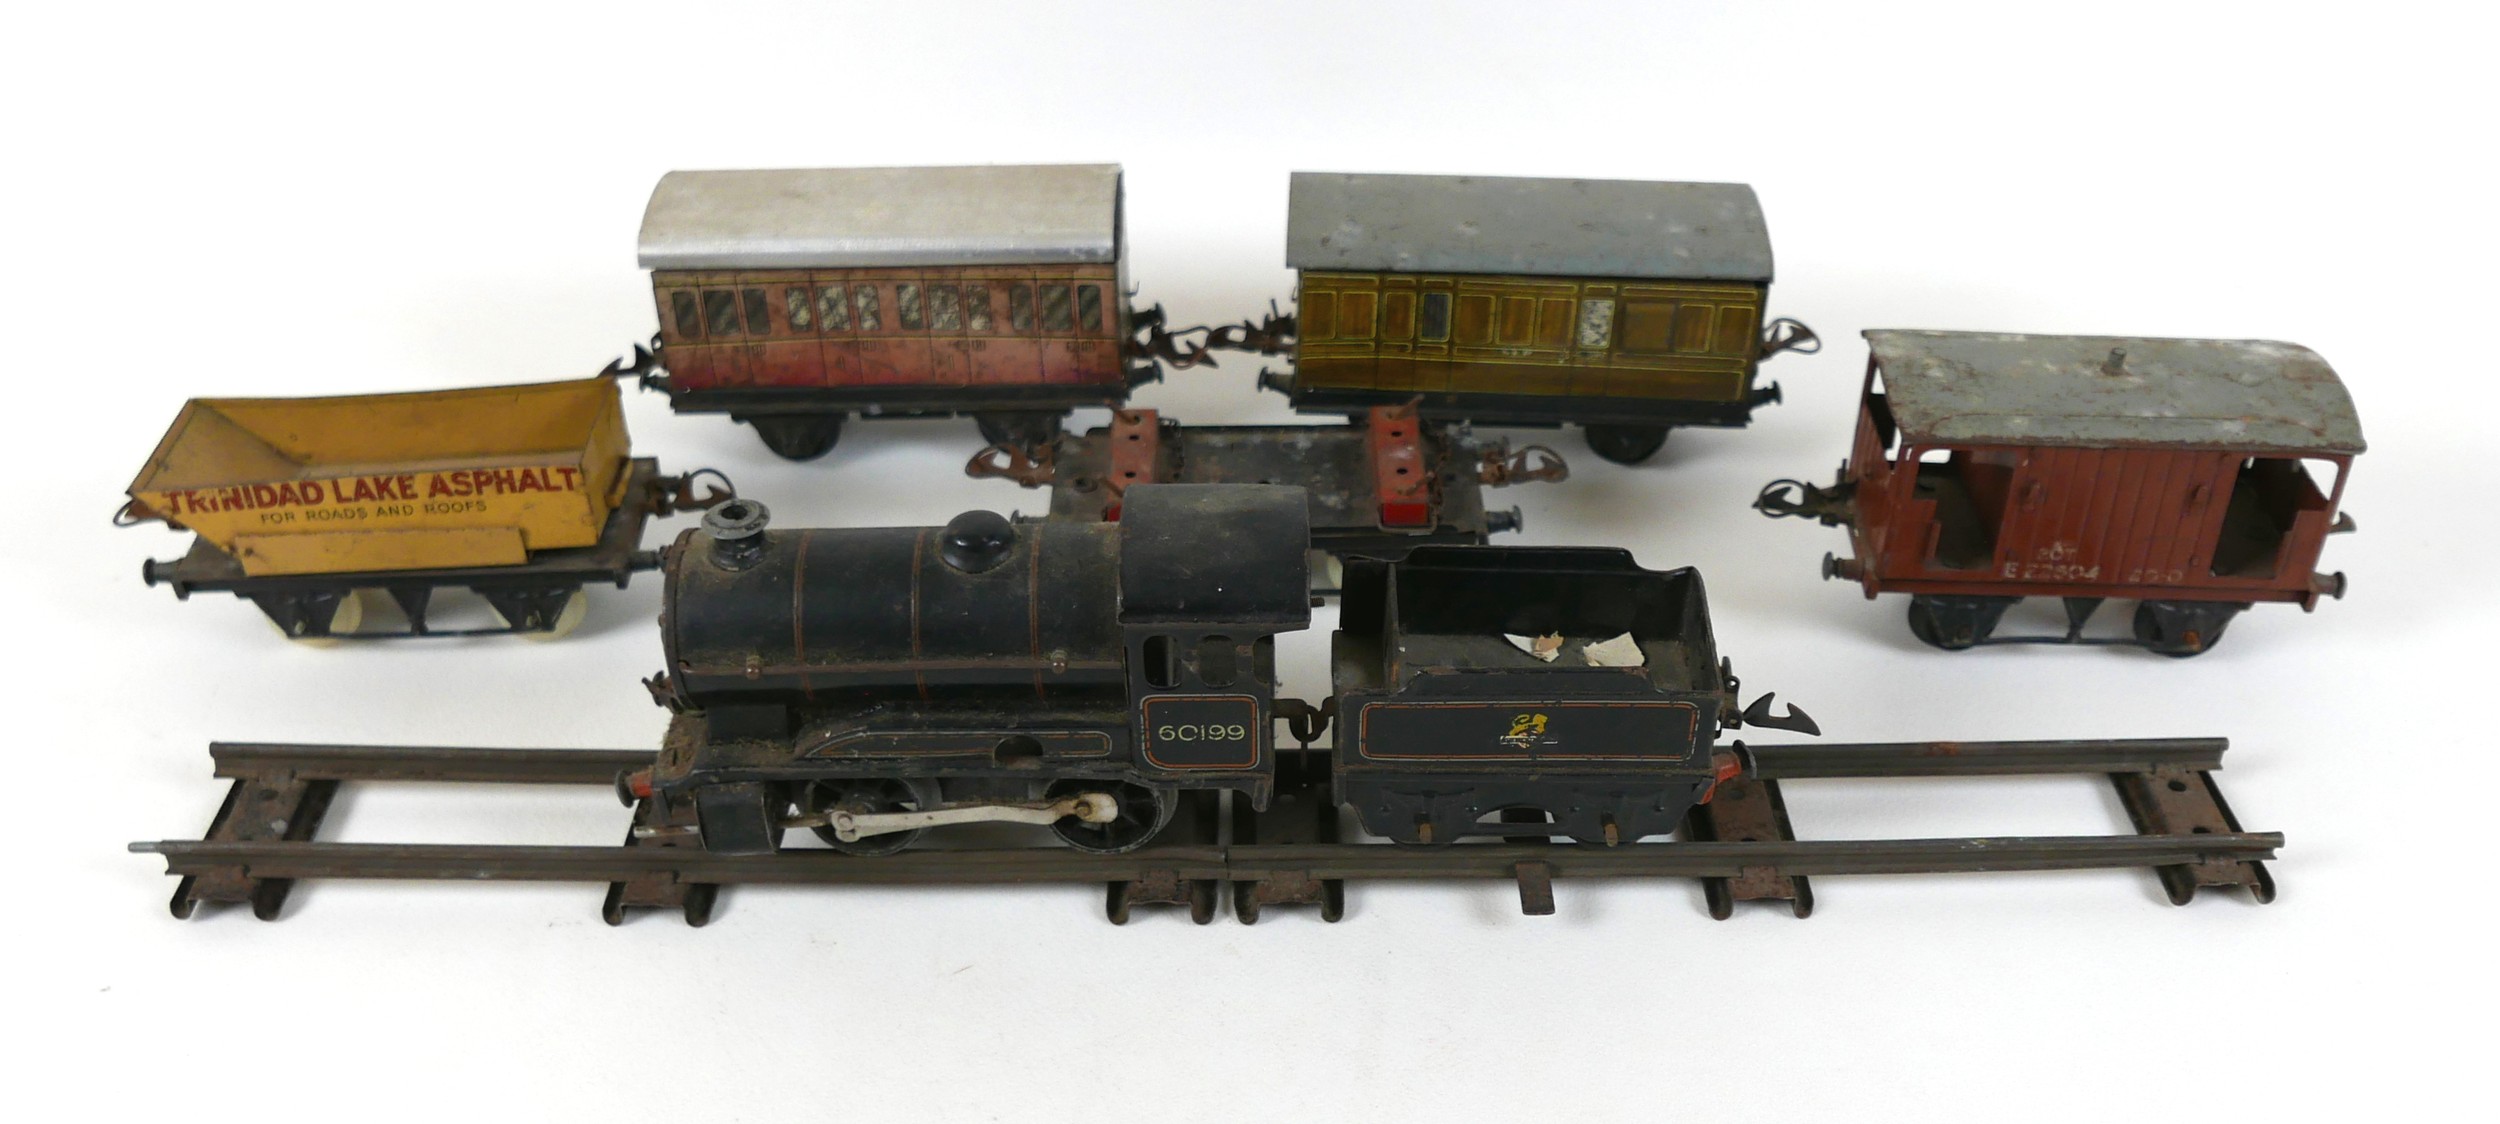 A Hornby O gauge tinplate train set, comprising a 60985 engine, in green livery for British